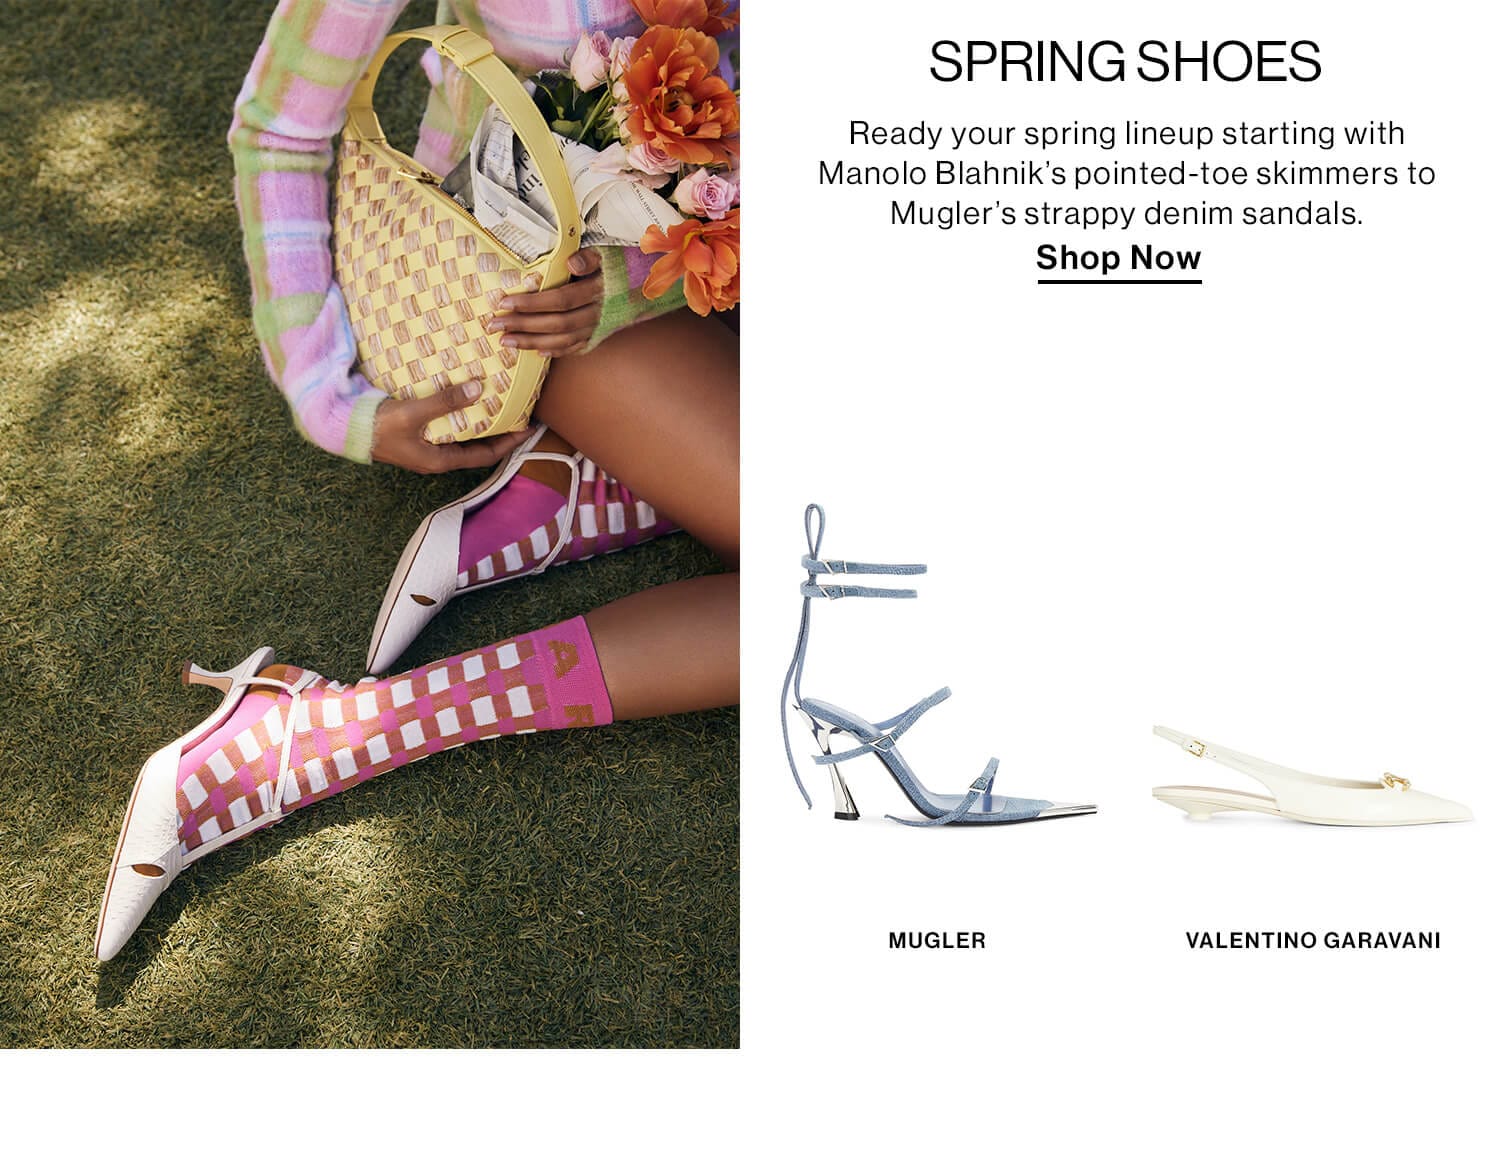 SPRING SHOES DEK: Ready your spring lineup starting with Manolo Blahnik’s pointed-toe skimmers to Mugler’s strappy denim sandals. CTA: Shop Shoes